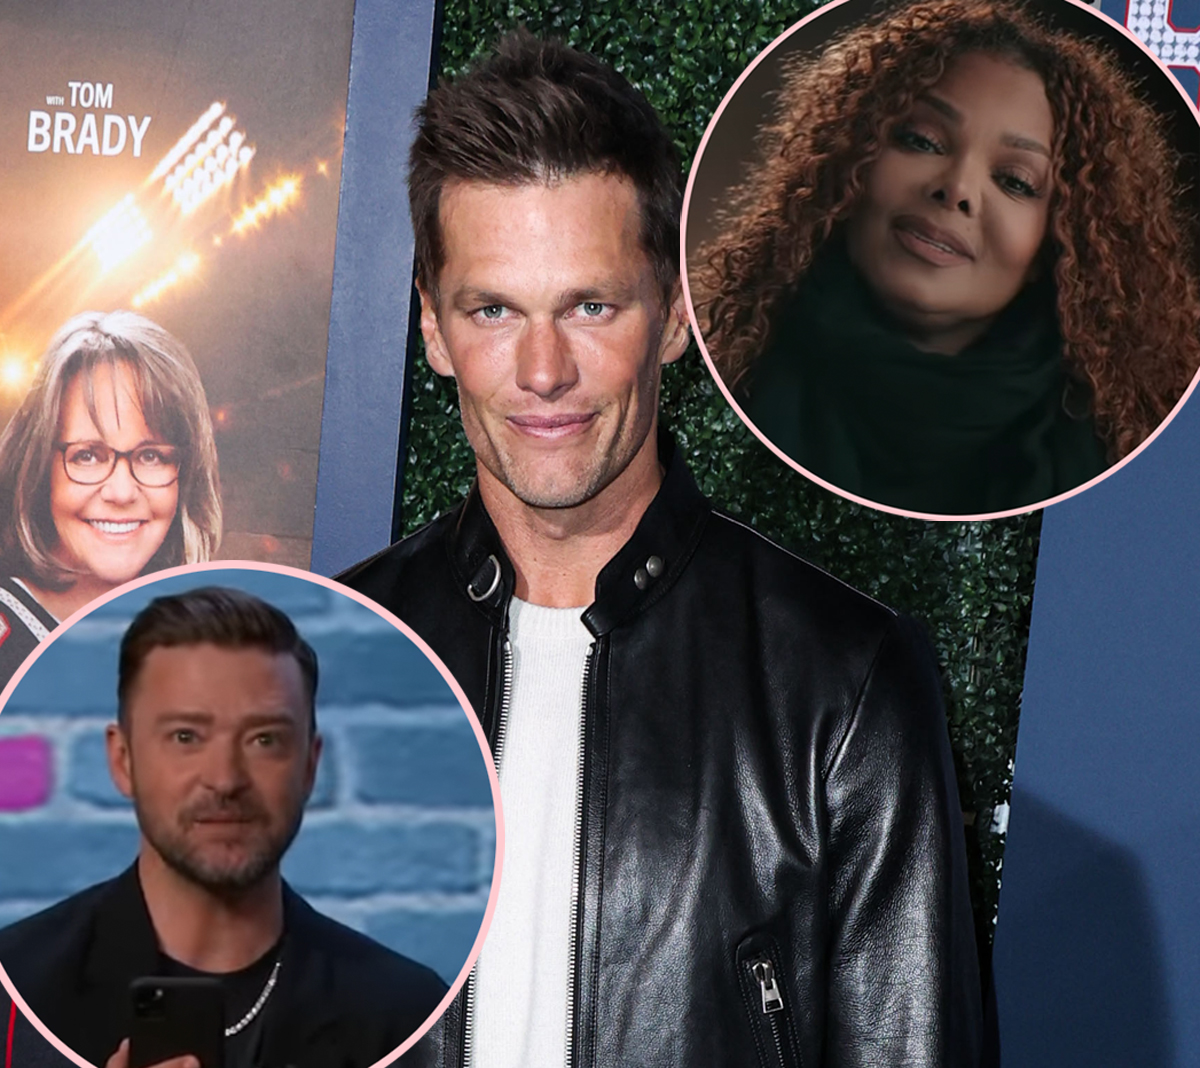 #Tom Brady Blasted For Saying Janet Jackson’s Infamous Super Bowl Wardrobe Malfunction Was ‘Good’ For The NFL!